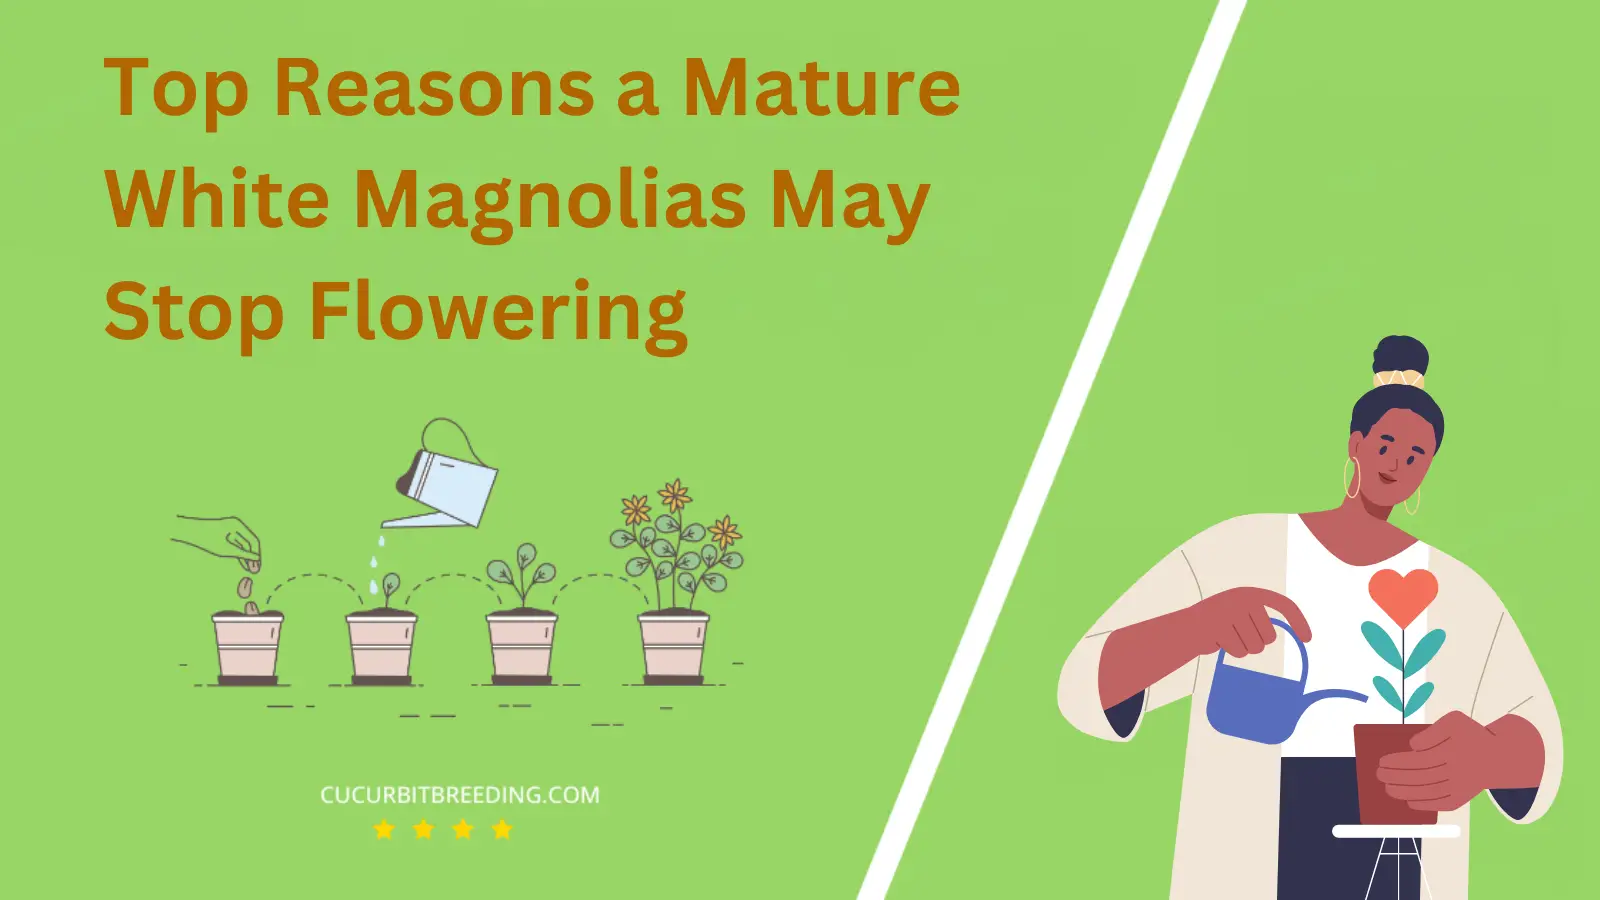 Top Reasons a Mature White Magnolias May Stop Flowering